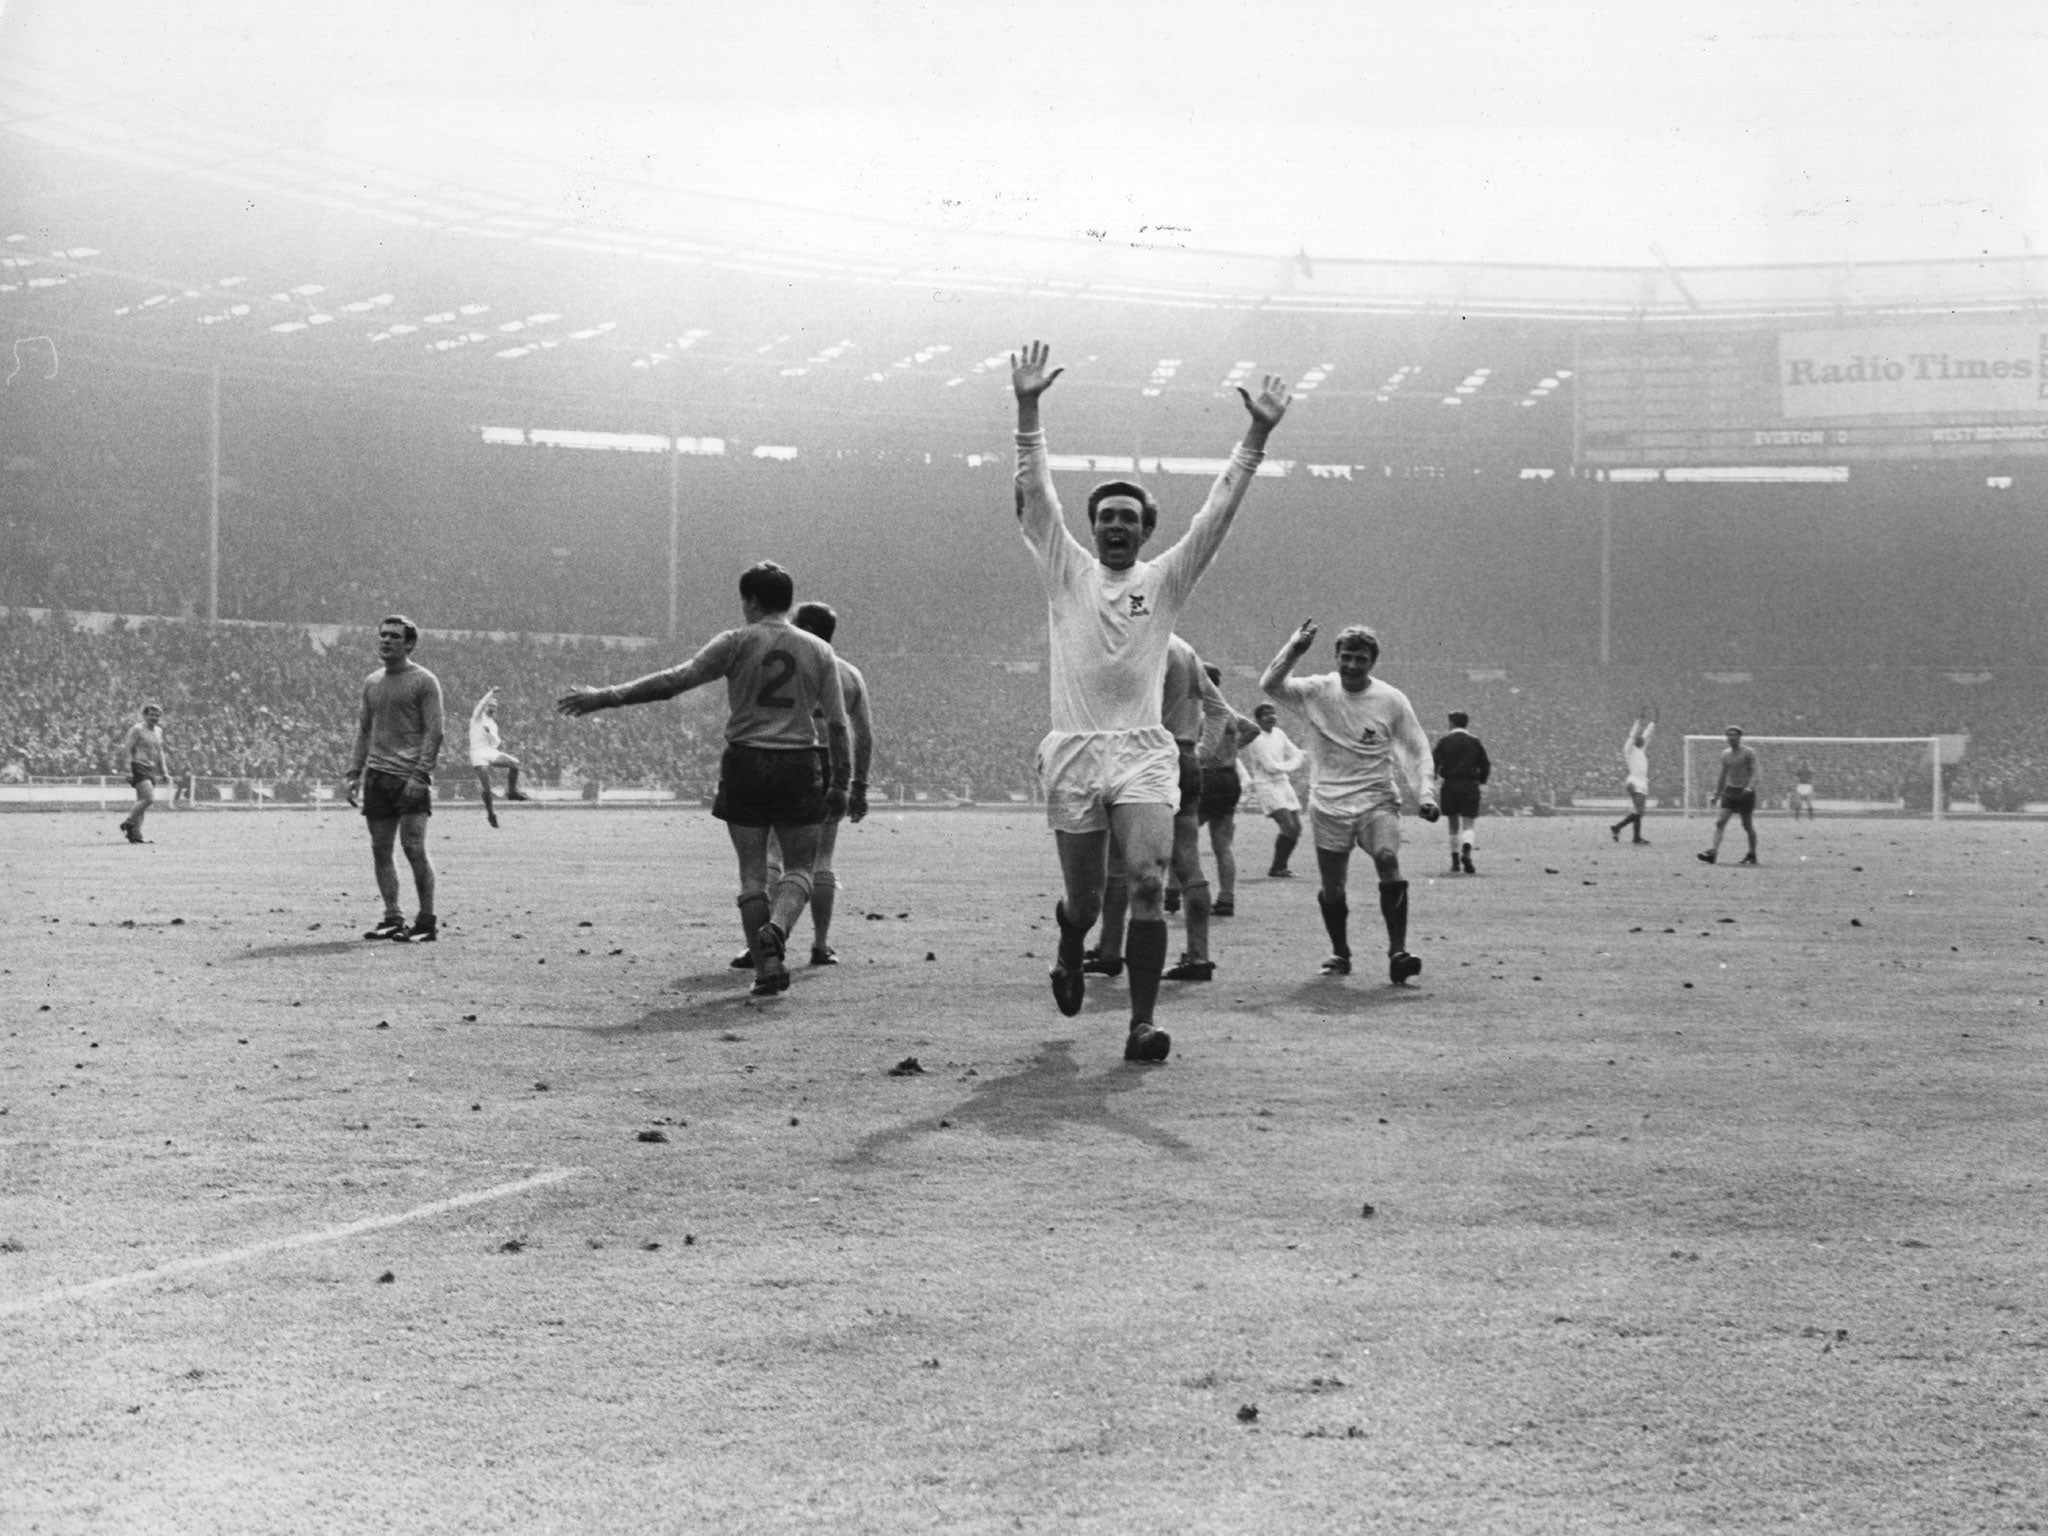 Jeff Astle raises his arms in victory after scoring the winning goal in West Brom's 1-0 win over Everton in the FA Cup final, 1968